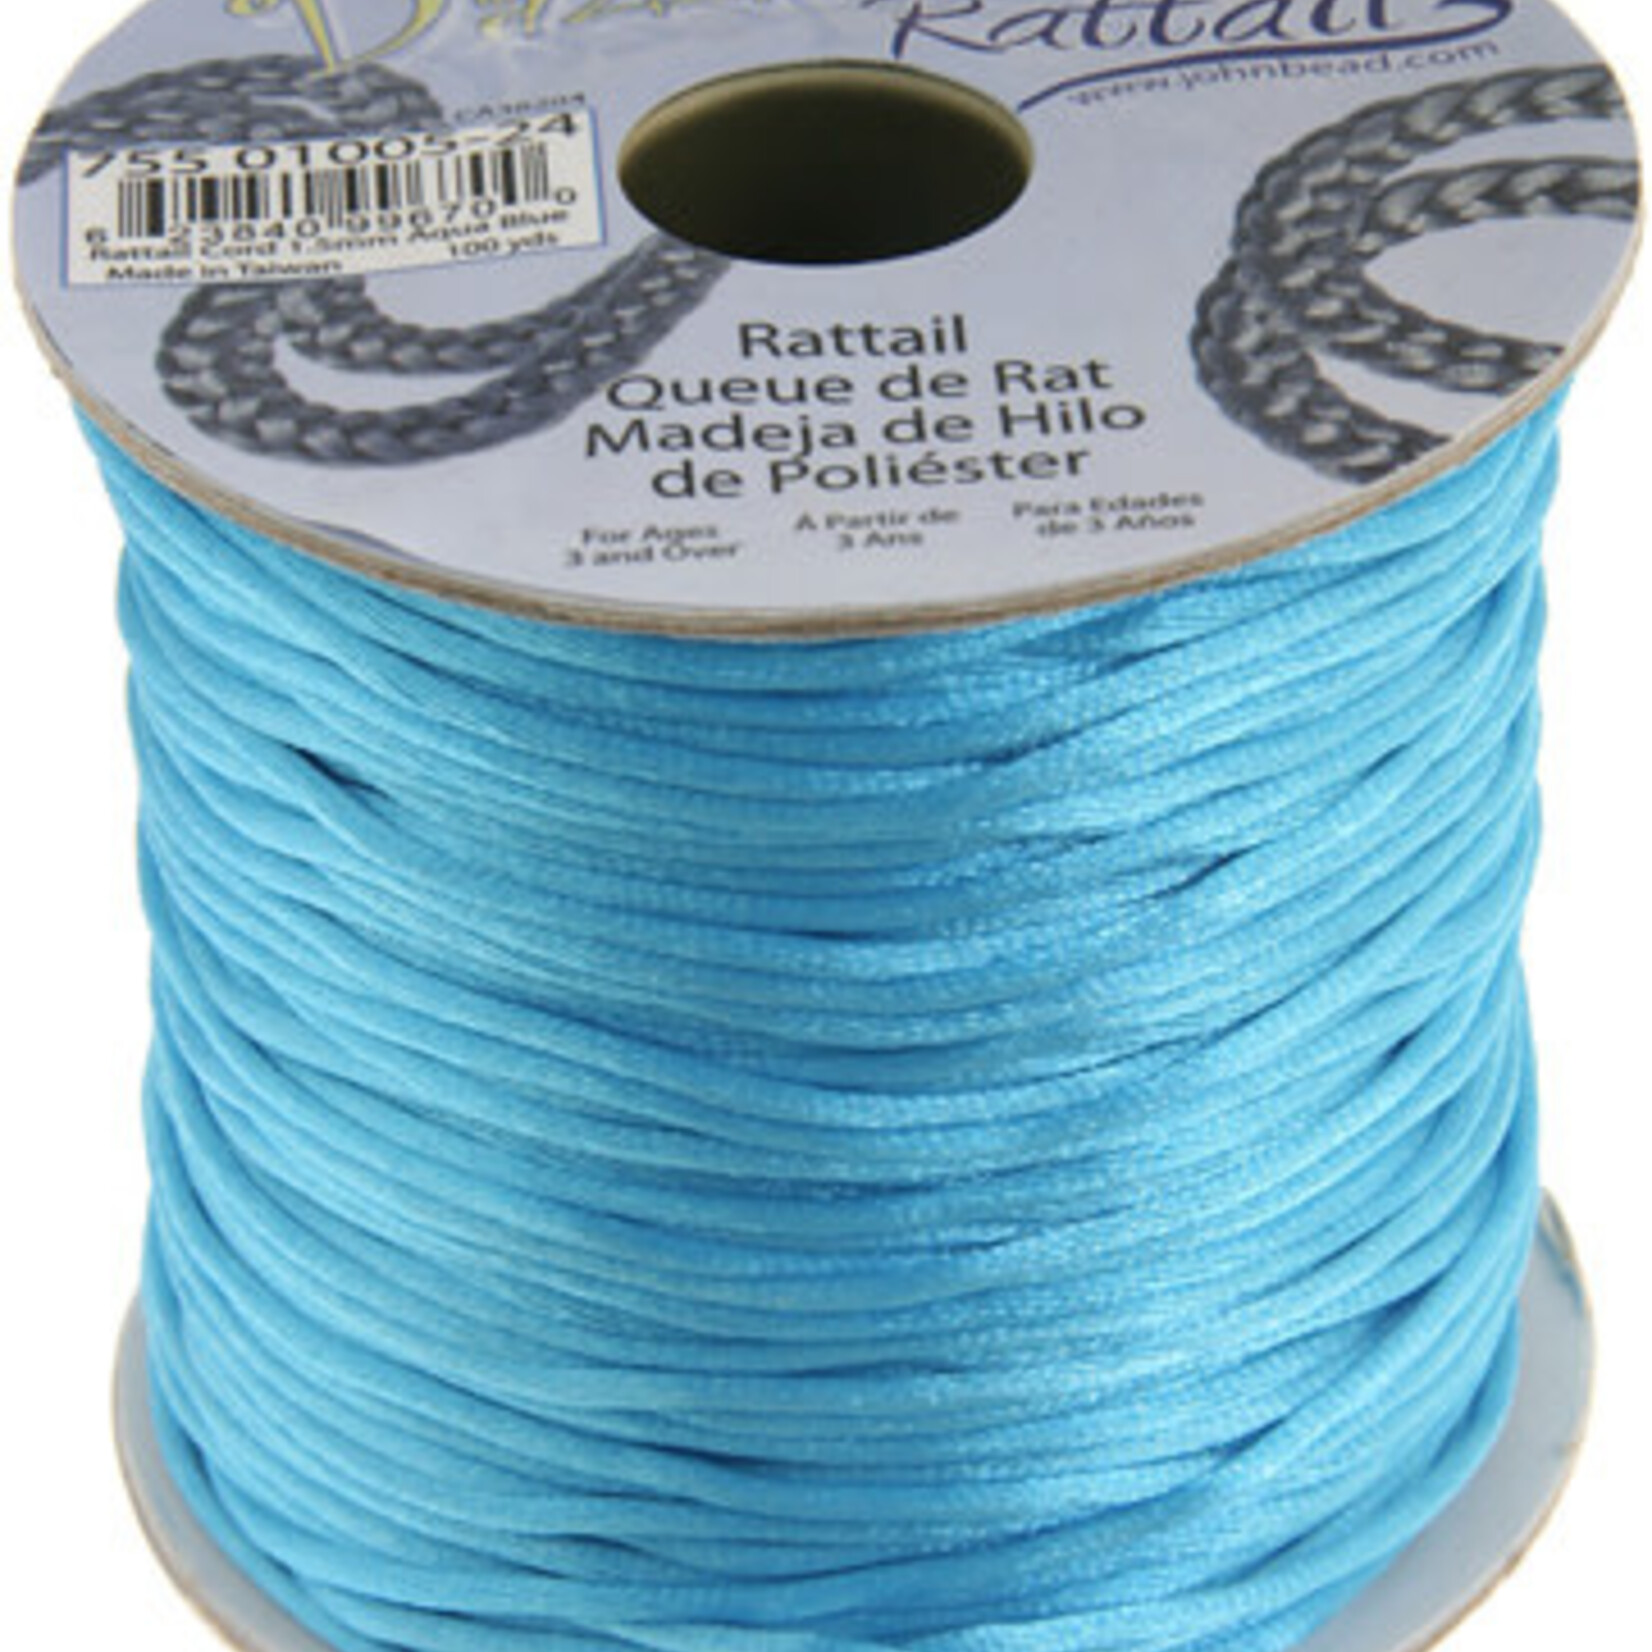 Turquoise 3 mm Rattail Satin Cord 100 Yards